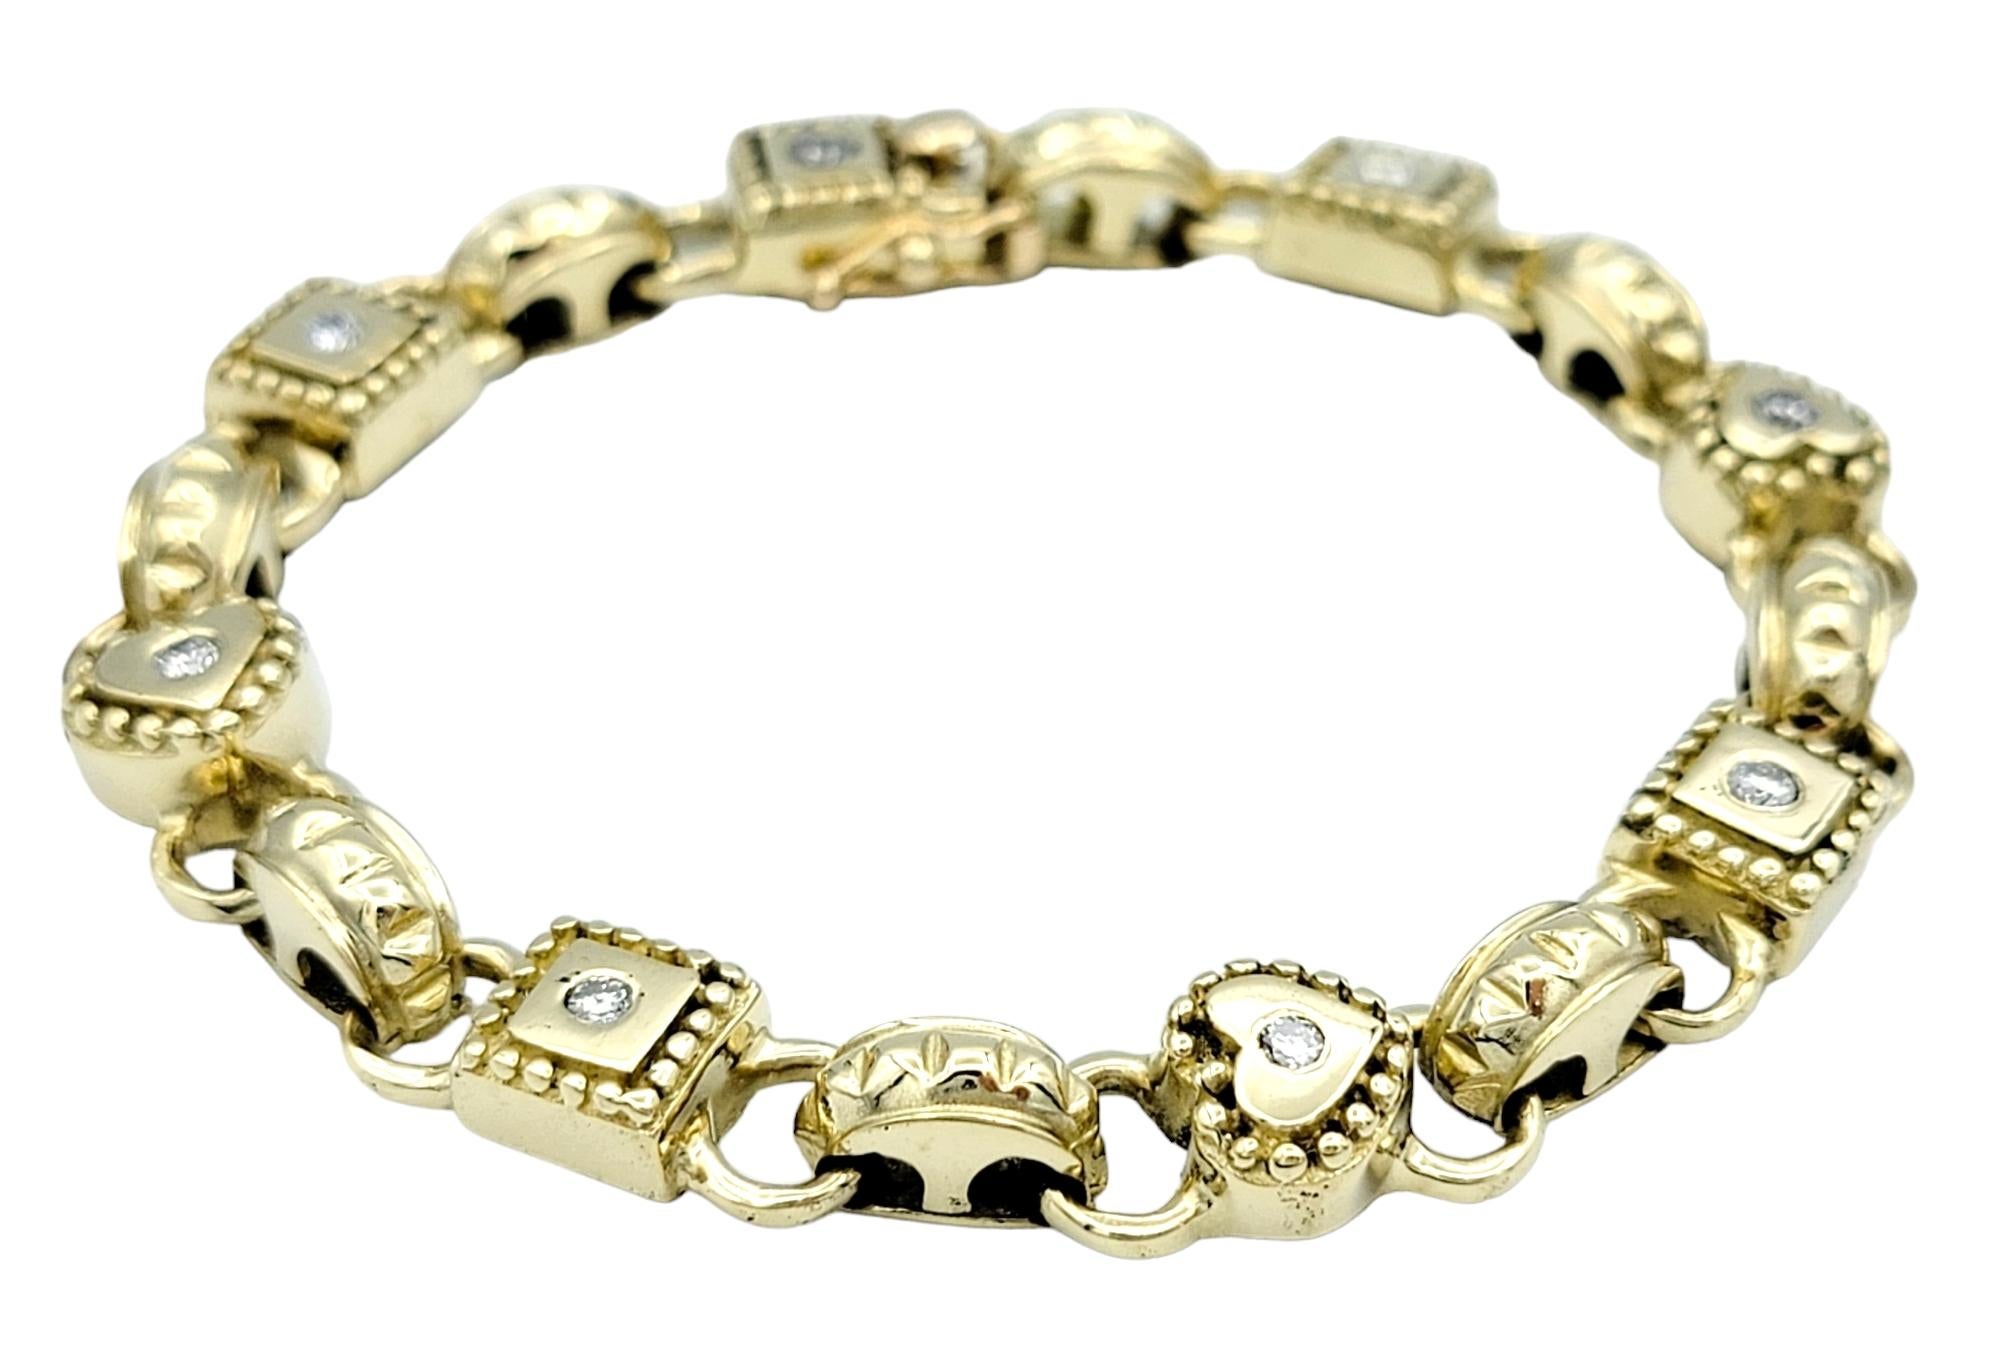 This gold link bracelet is a gorgeous masterpiece that seamlessly blends simplicity with elegance. The alternating links, featuring classic square and heart shapes, along with the uniquely ridged links, give the piece a dynamic and eye-catching